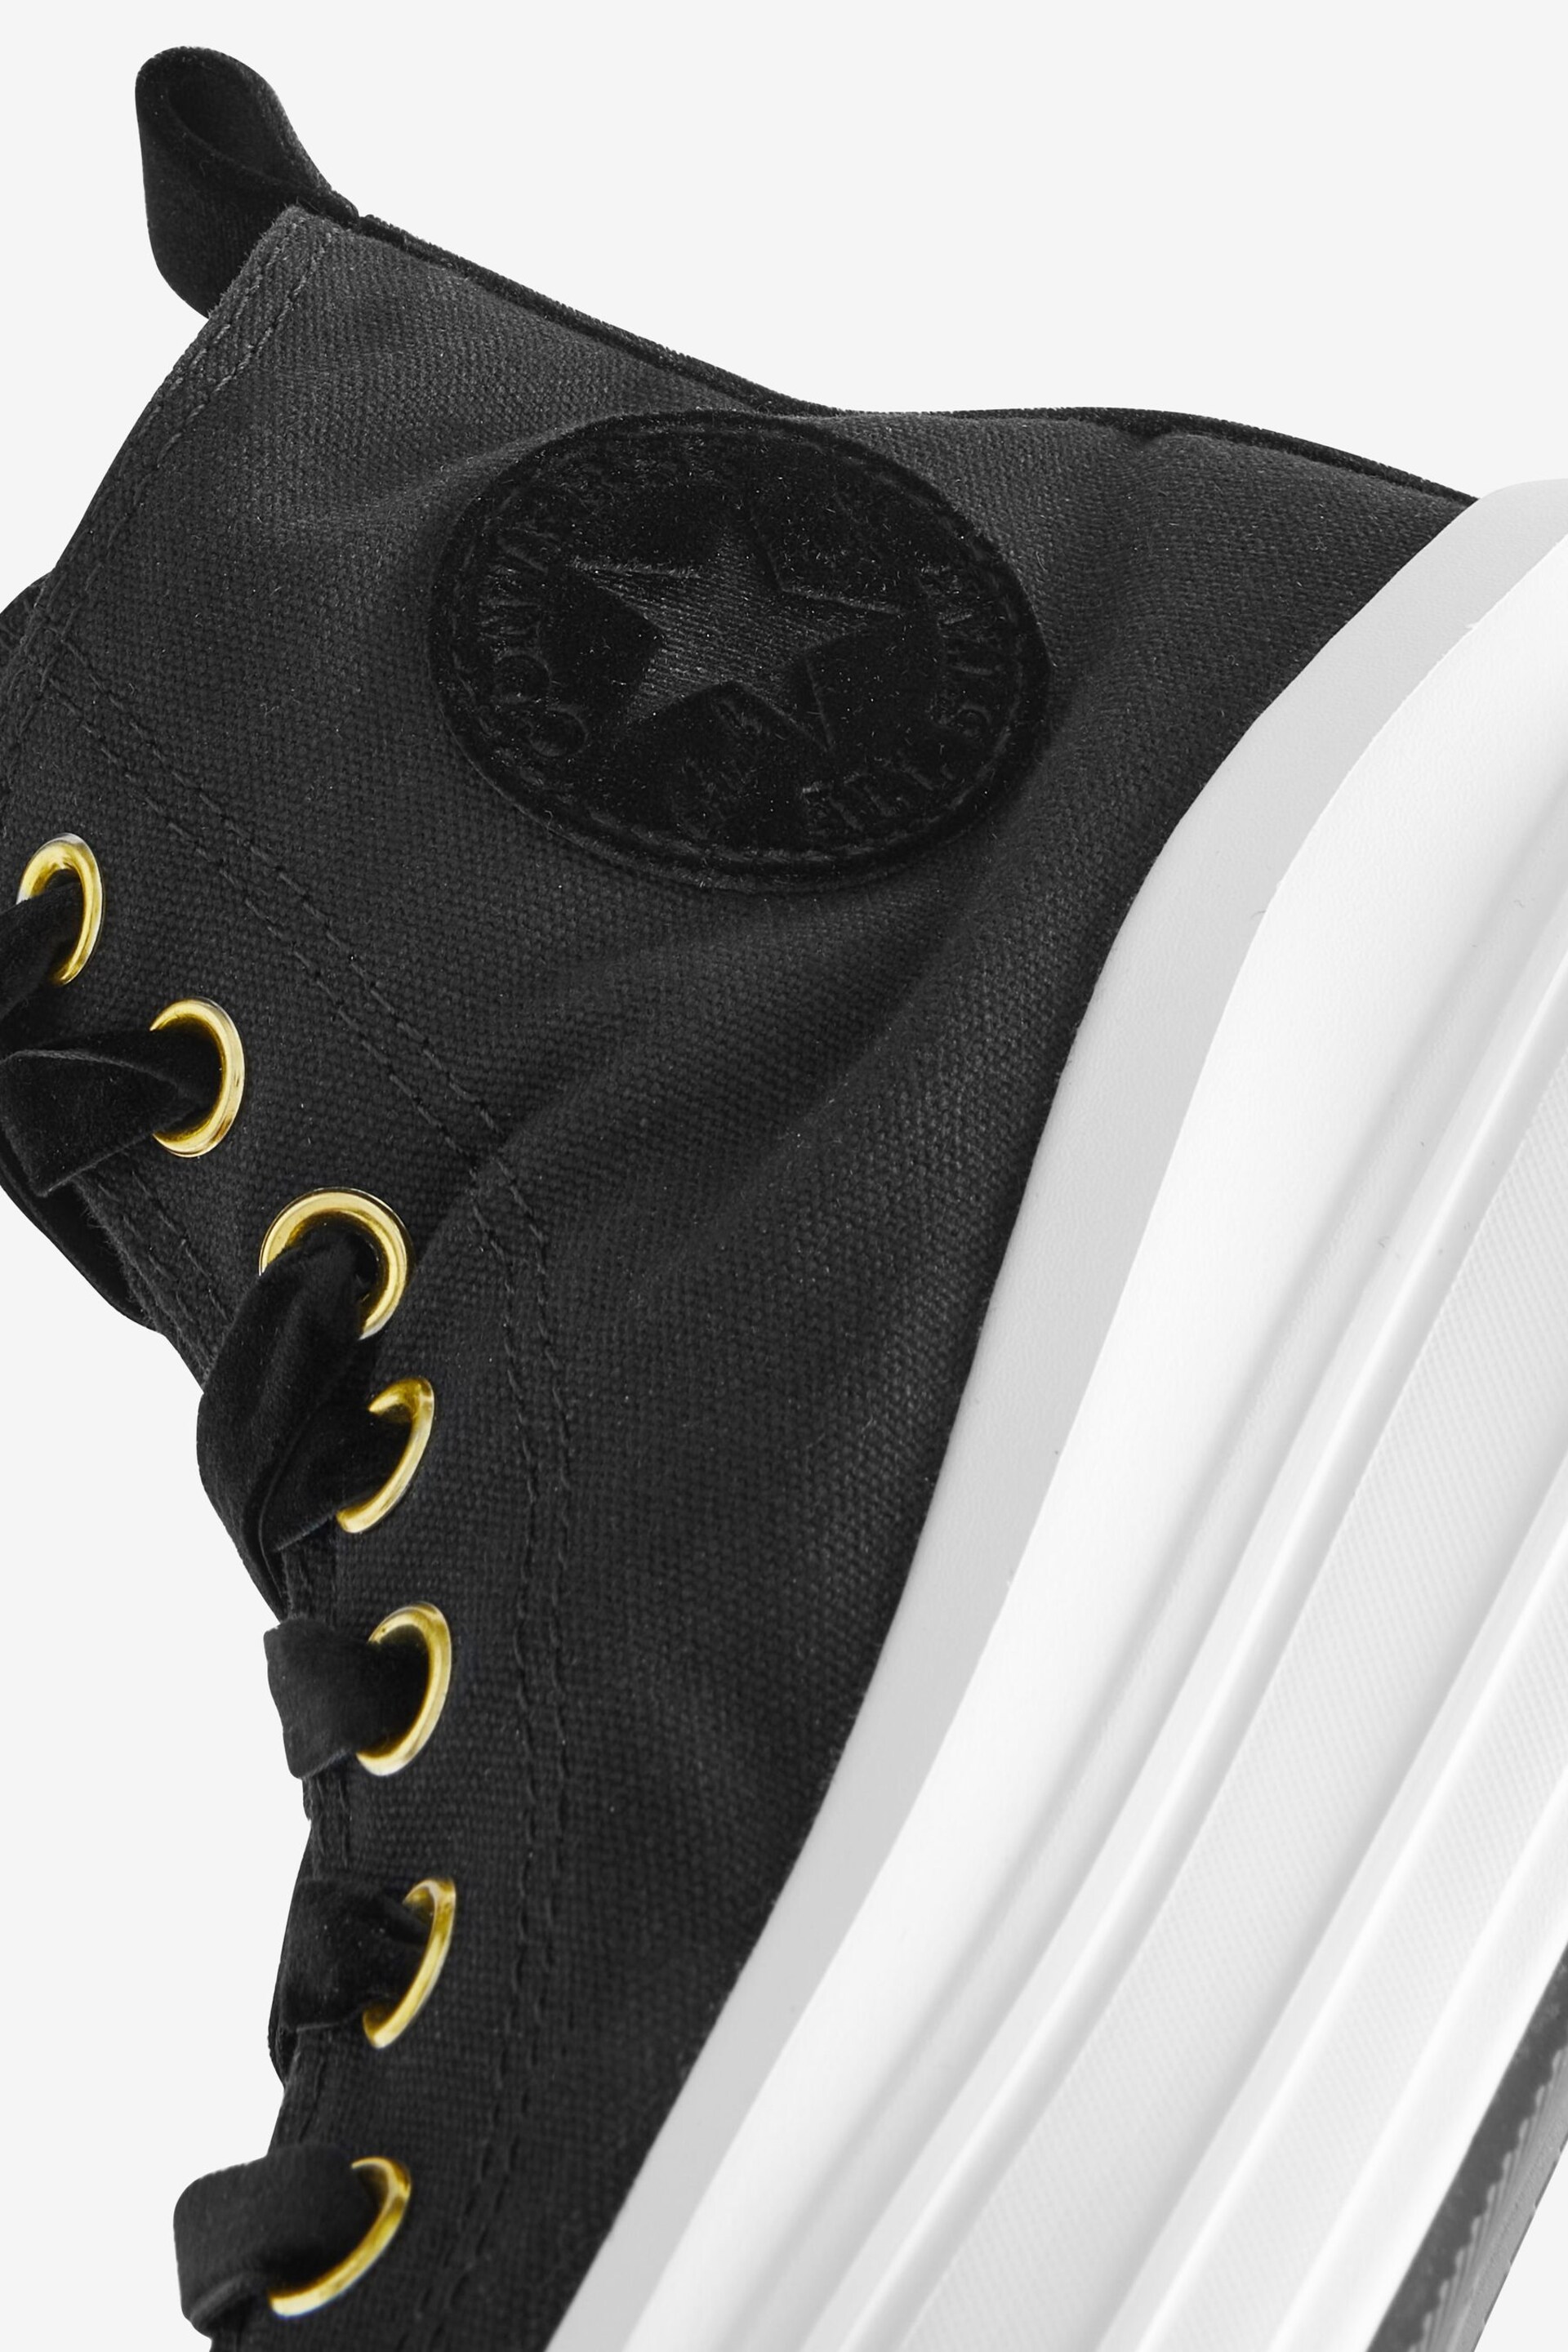 Converse Black Velvet Move Youth Trainers - Image 13 of 14